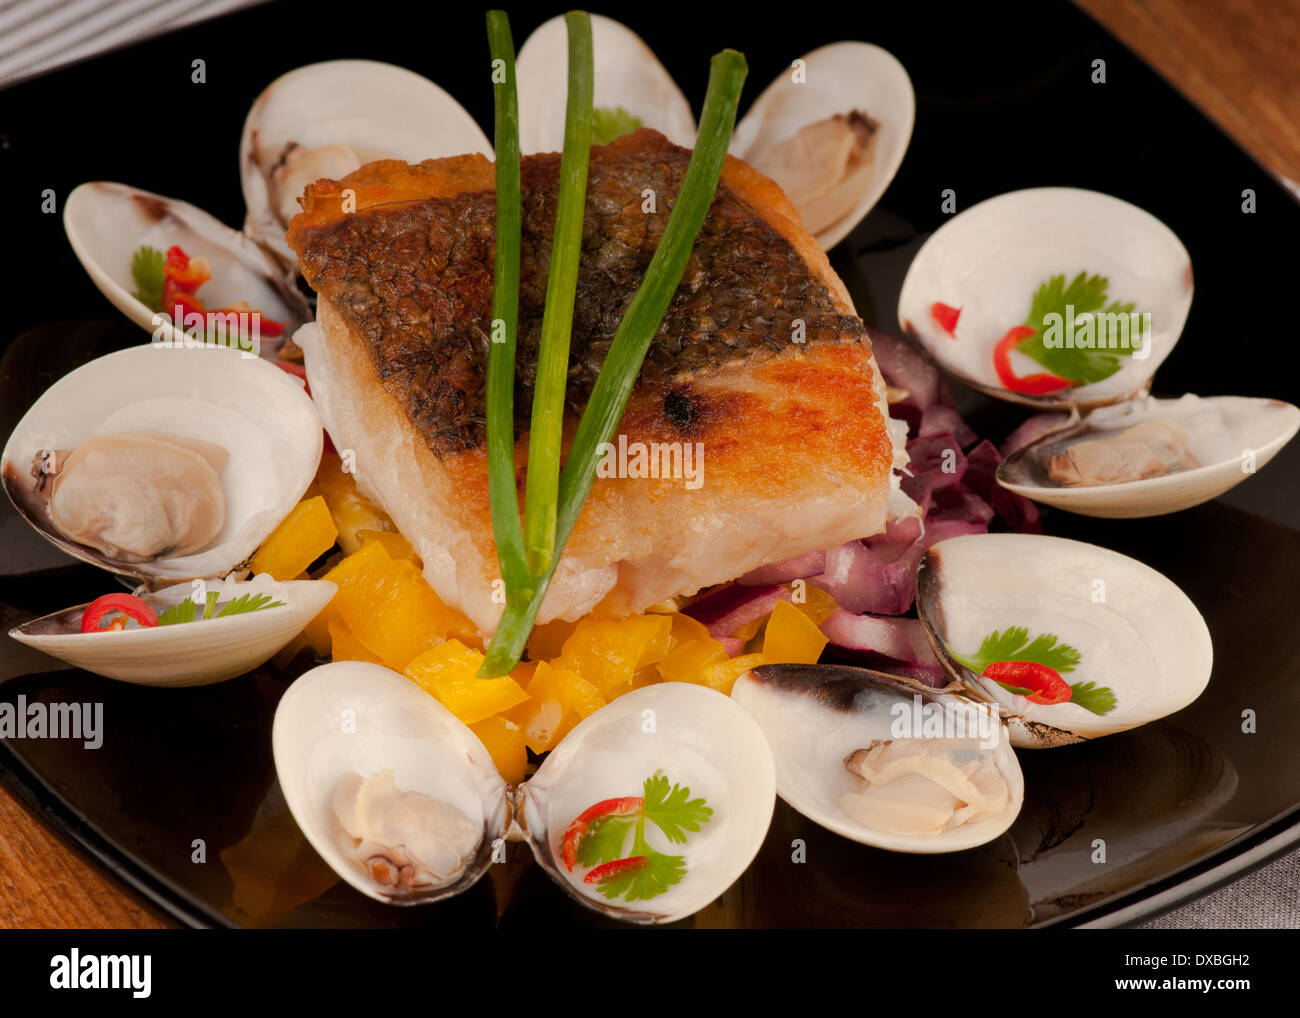 Crisp seared cod fillet on a bed of chives garnished with almejas, clams, and chili on a black plate Stock Photo